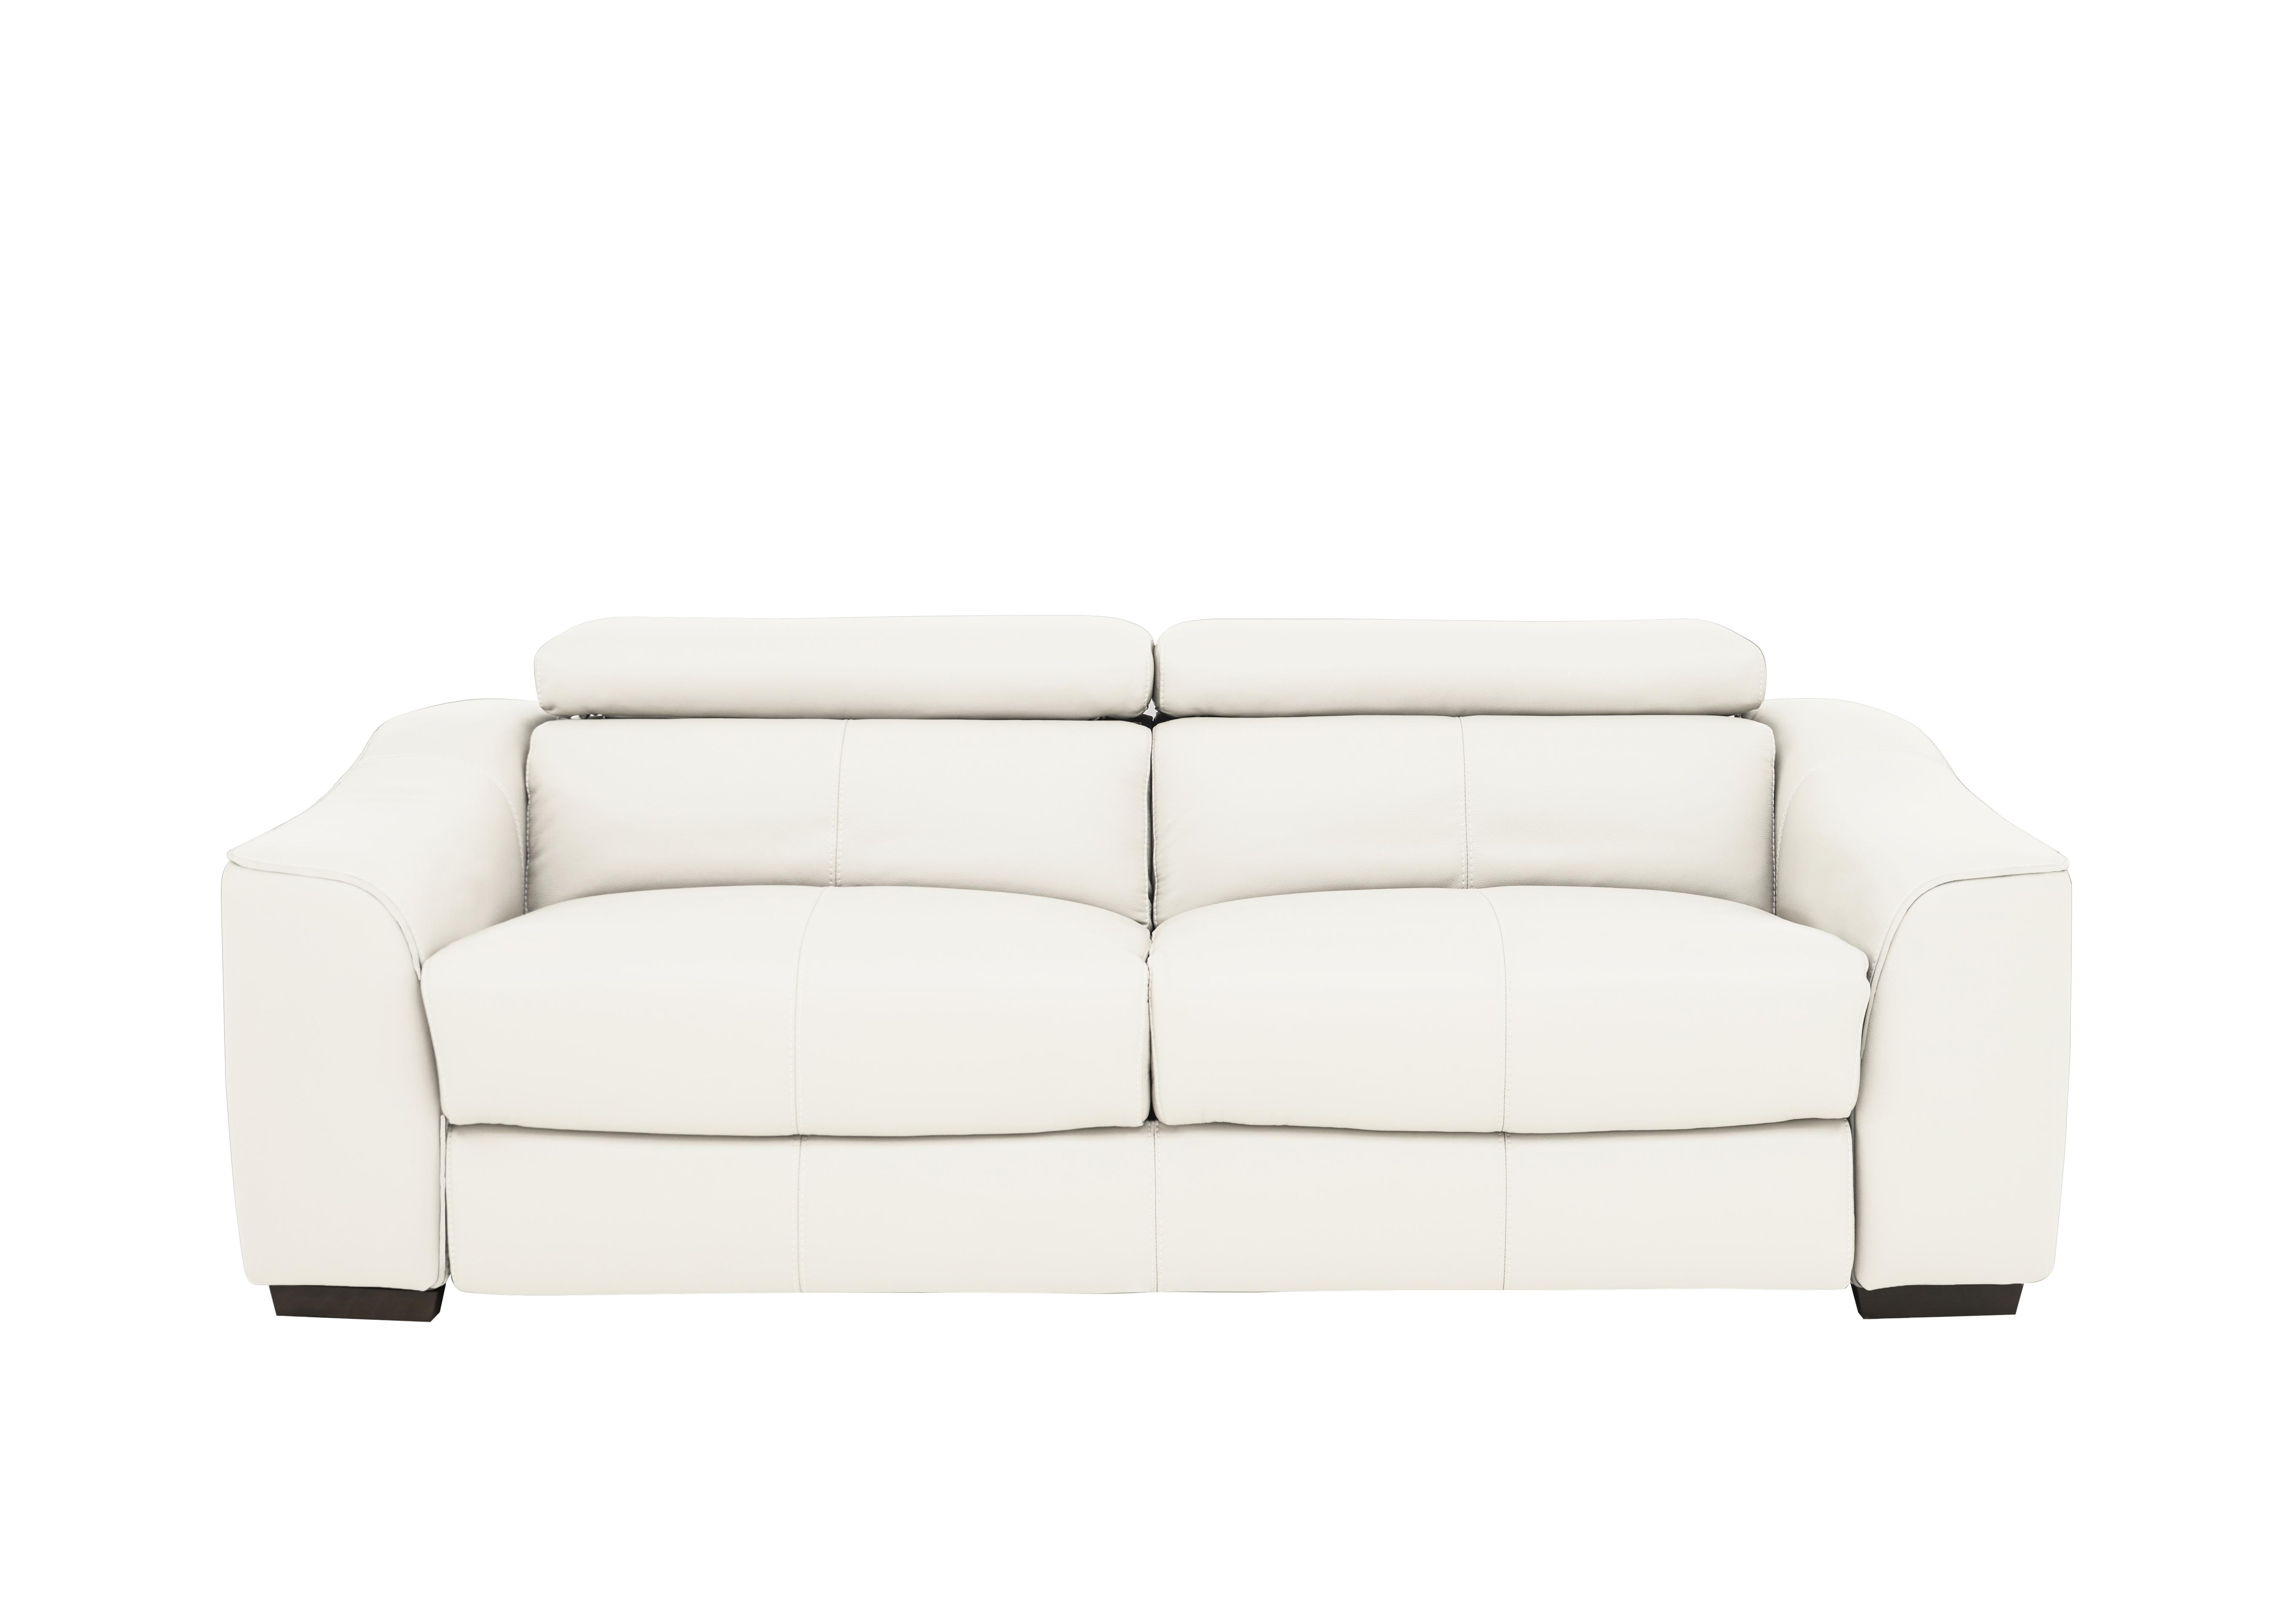 Elixir 3 Seater Leather Sofa Bed in Bv-744d Star White on Furniture Village